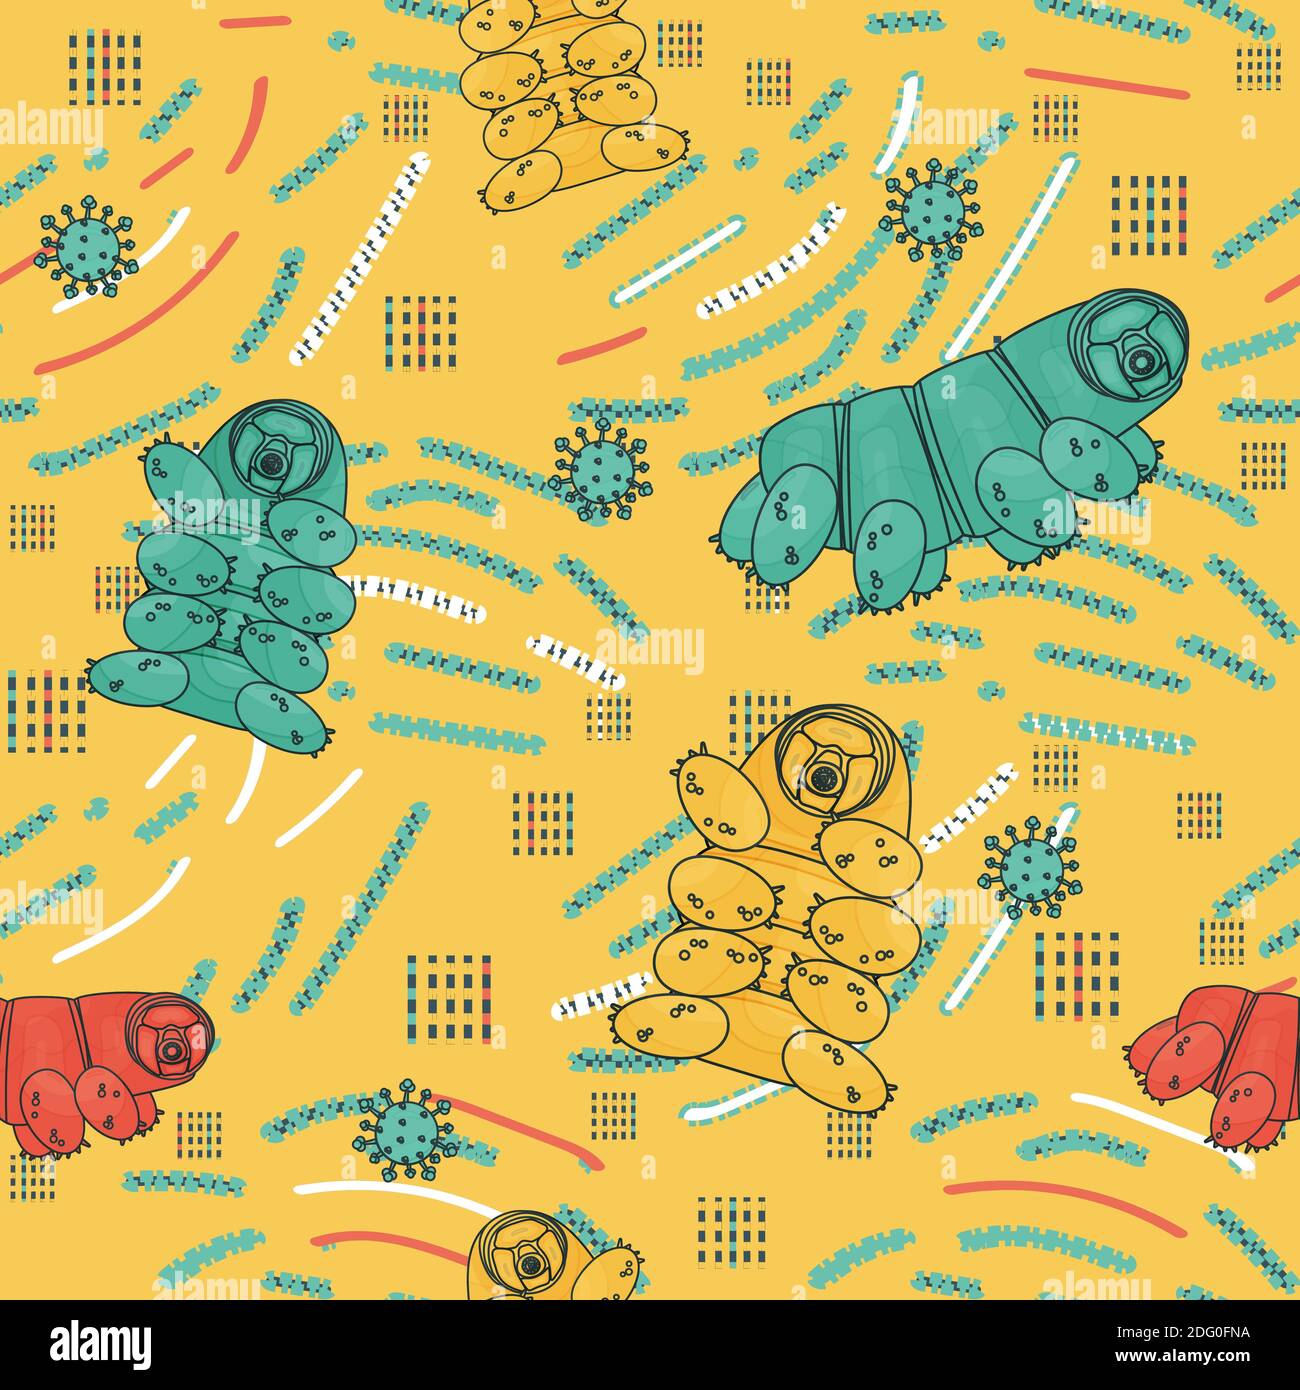 Yellow, blue, white, pink abstract tardigrade seamless repeat pattern with lines and dots Stock Vector